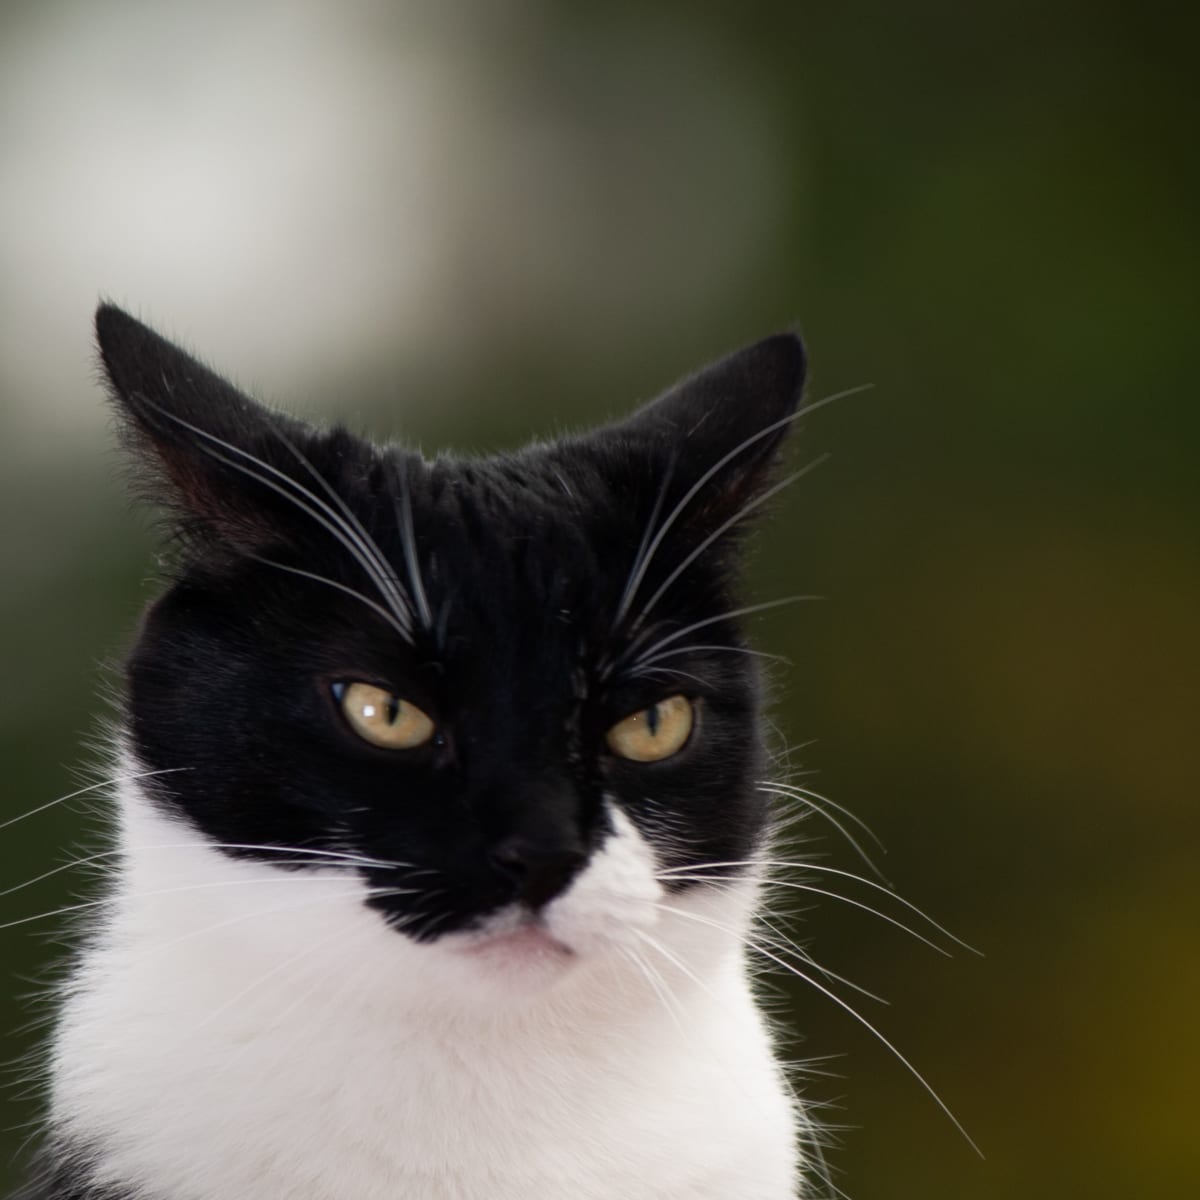 Face of angry cat with yellow eyes. House Cat with lowered ears